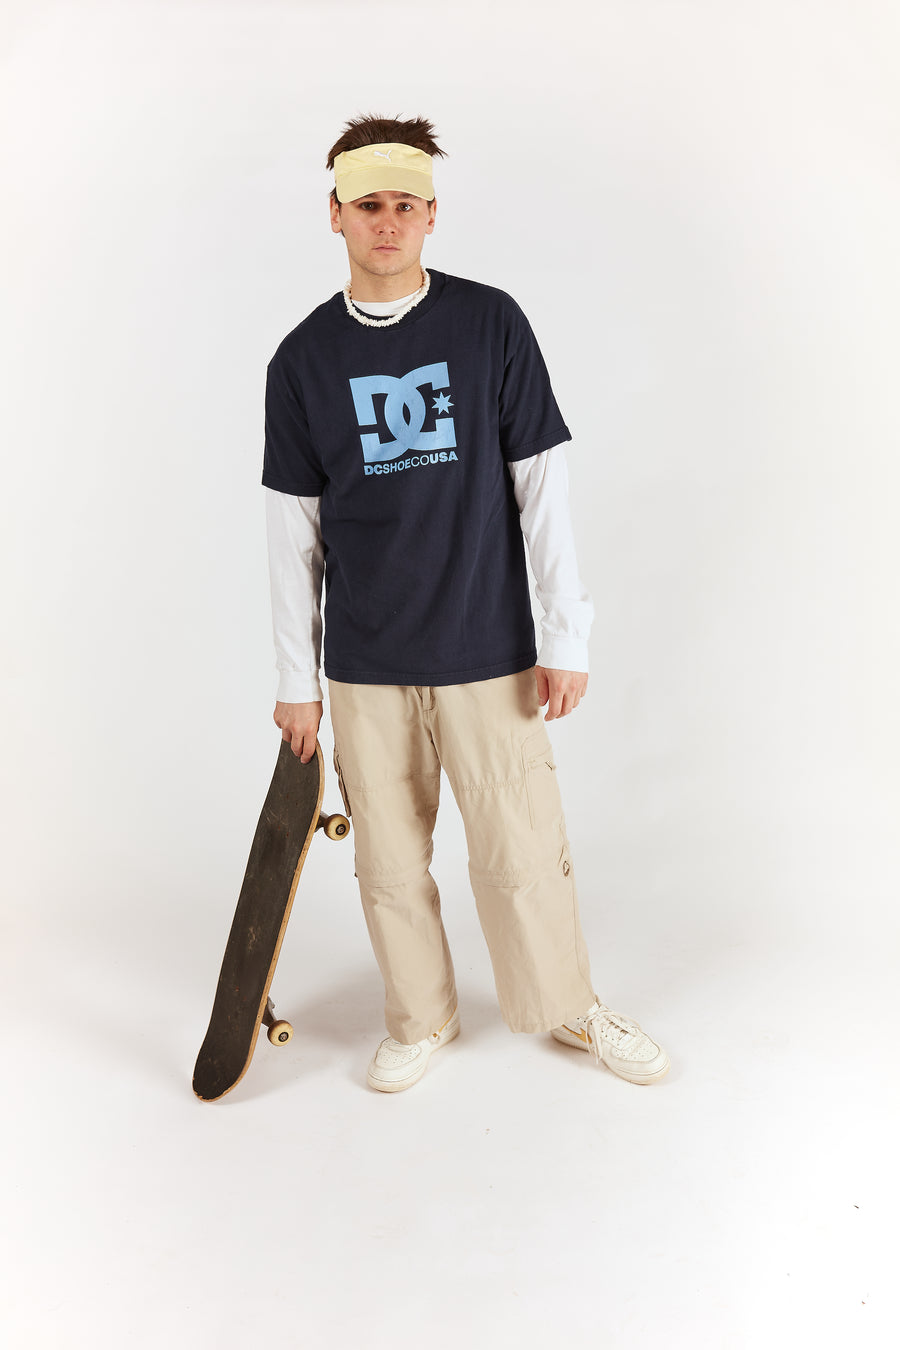 Early 2000s DC shoes T-shirt